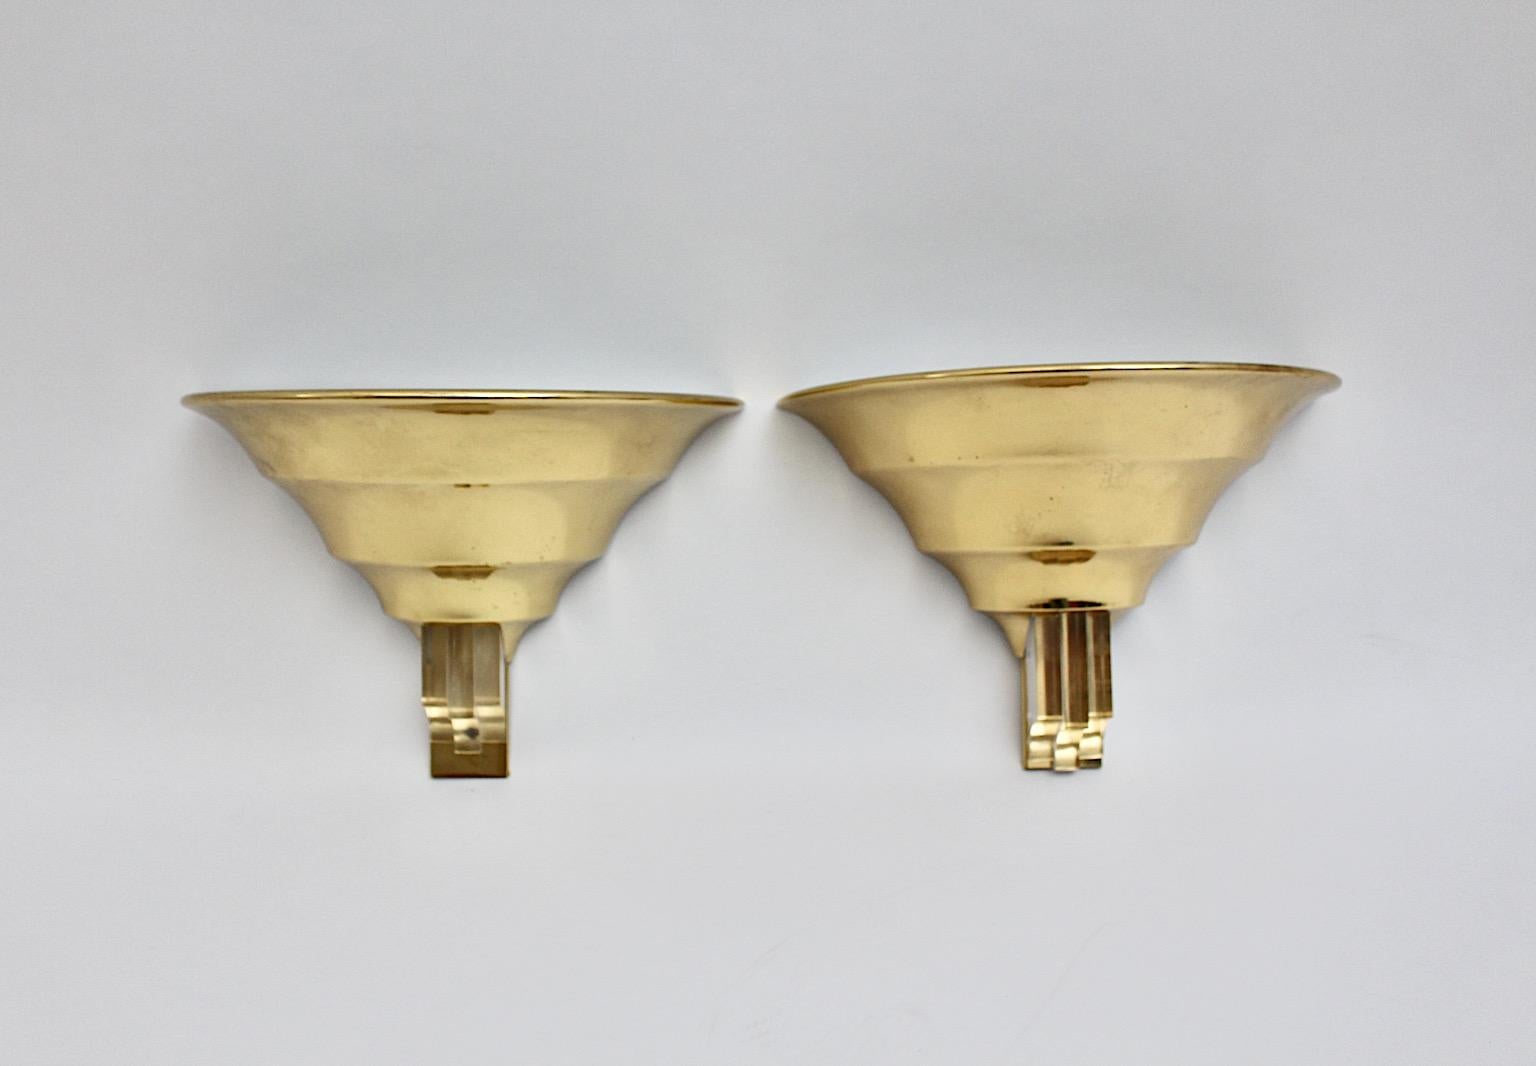 Art Deco Style vintage pair of sconces or wall lights from brass and lucite 1980s Italy.
An amazing duo pair of Art Deco style sconces with a conical grooved shape and decorated at the bottom with lucite. The material lucite points out the elegant